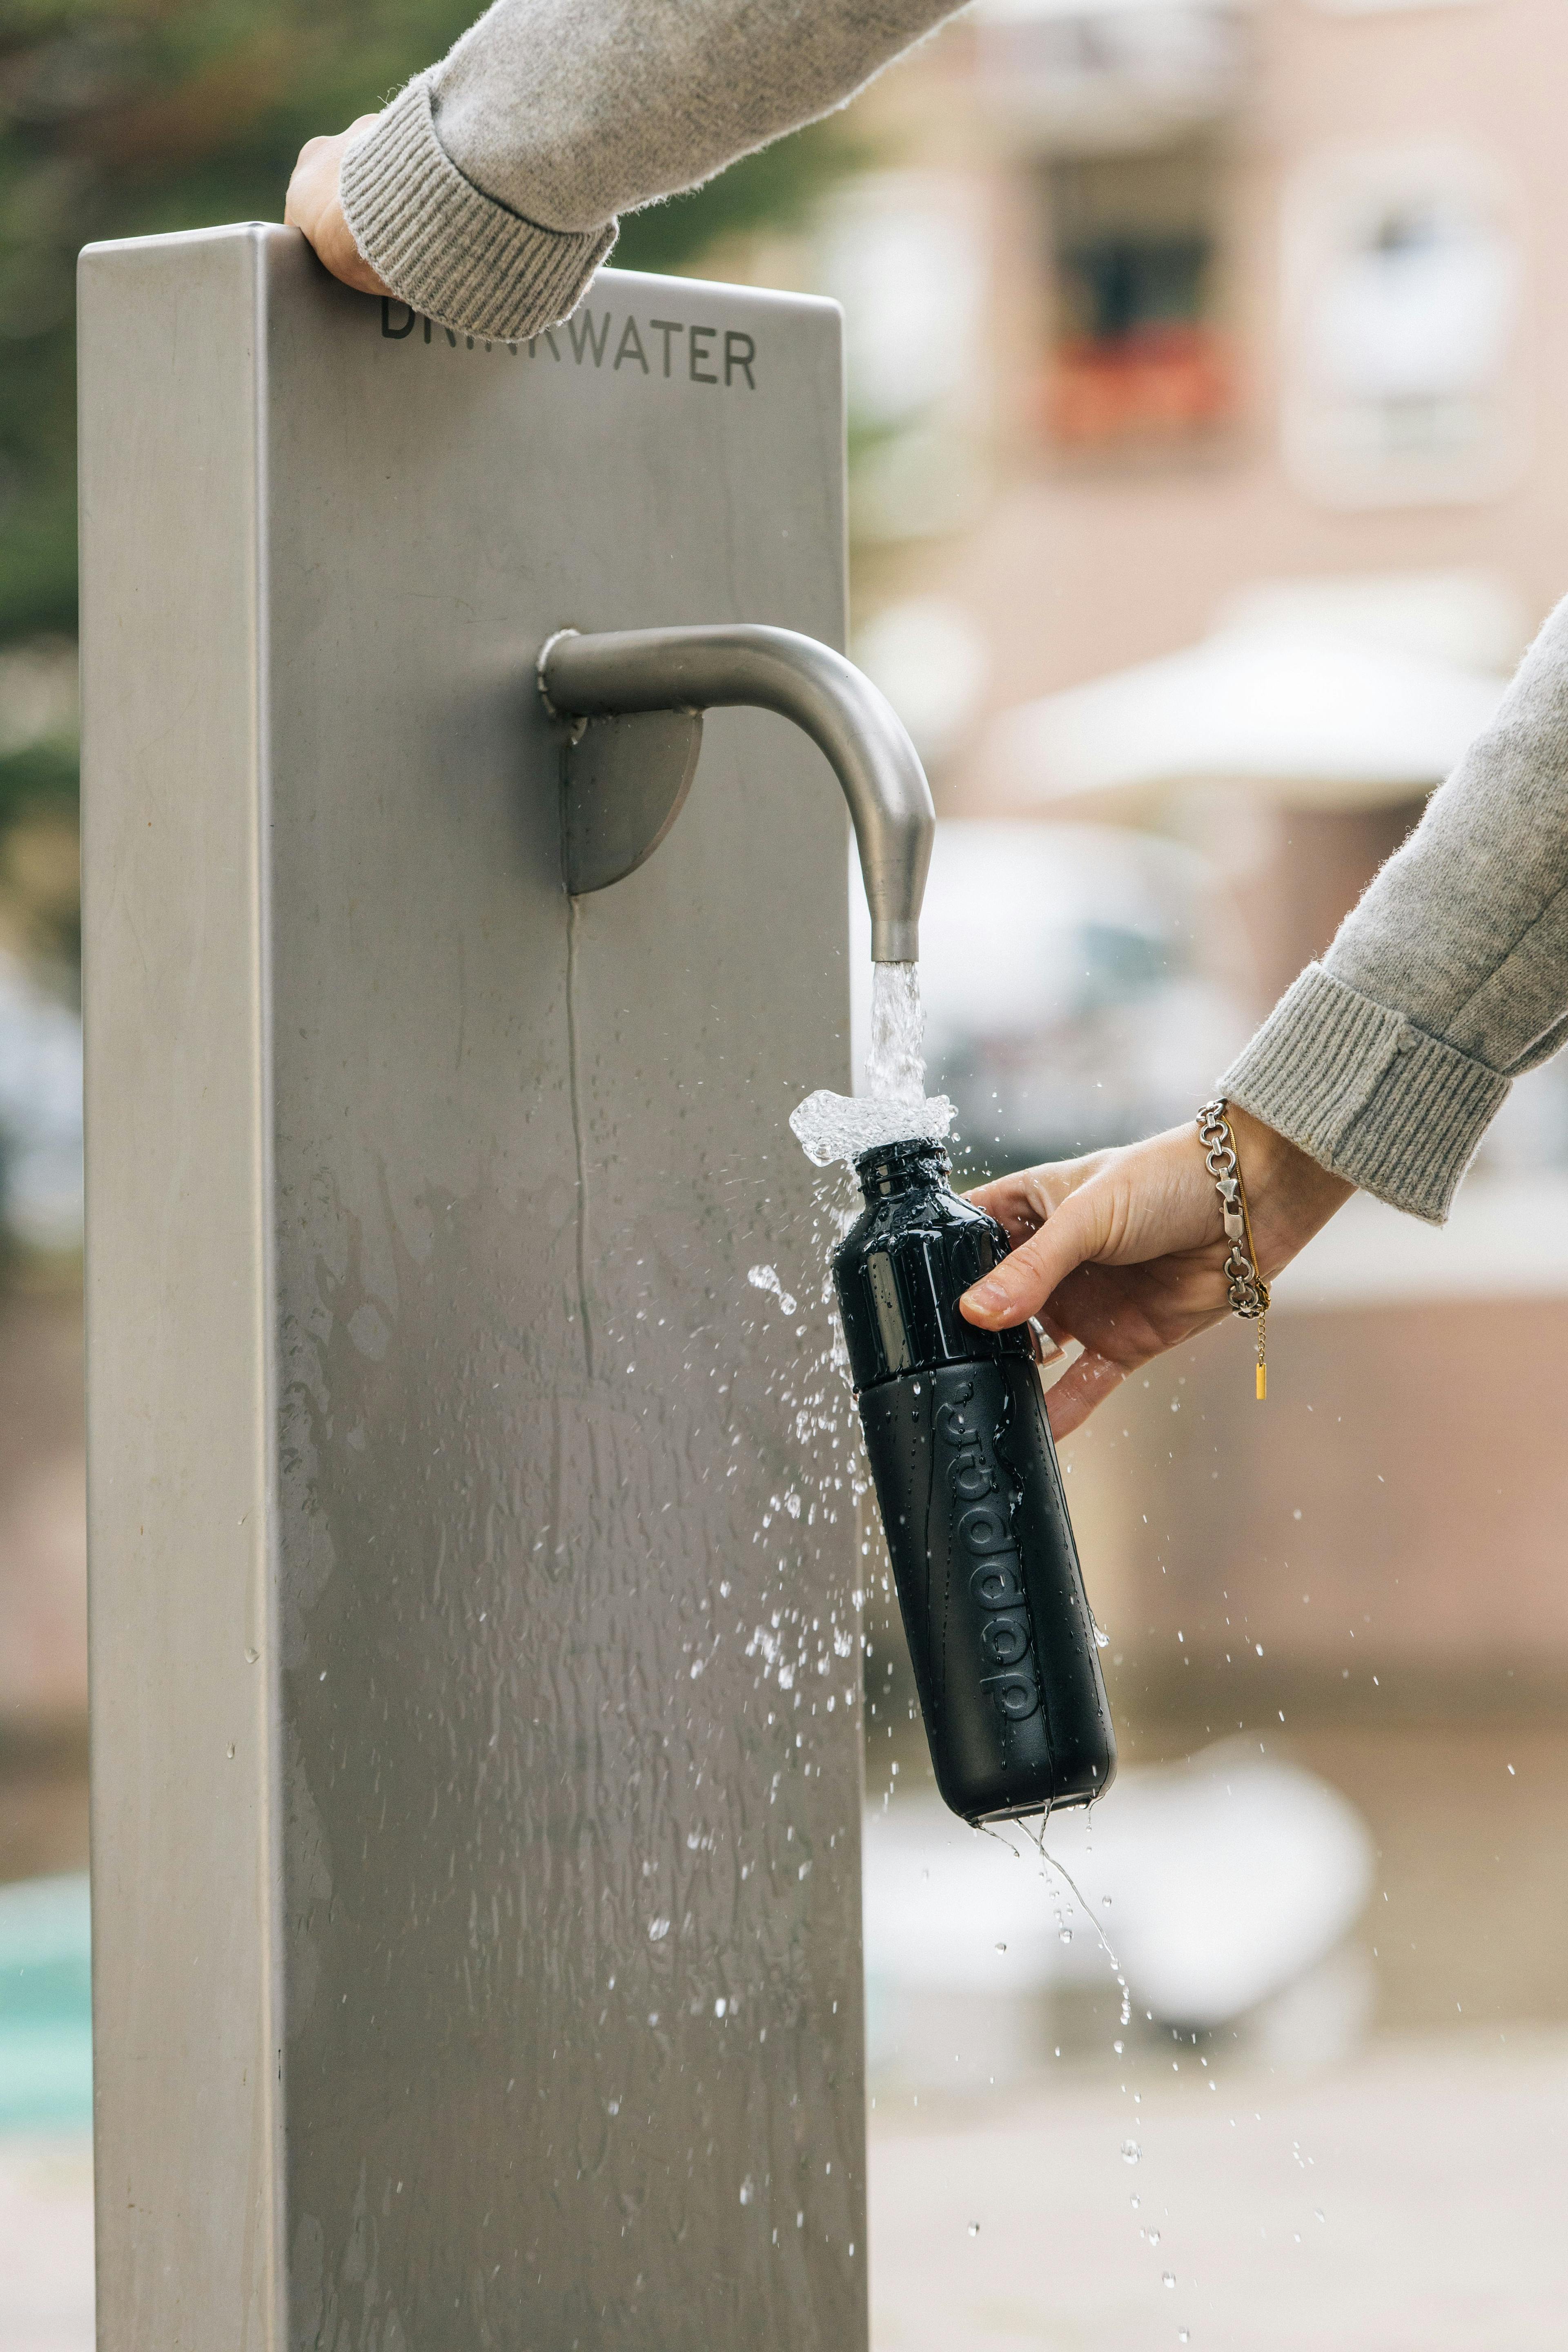 Person refilling their black Dopper bottle at a public water tap